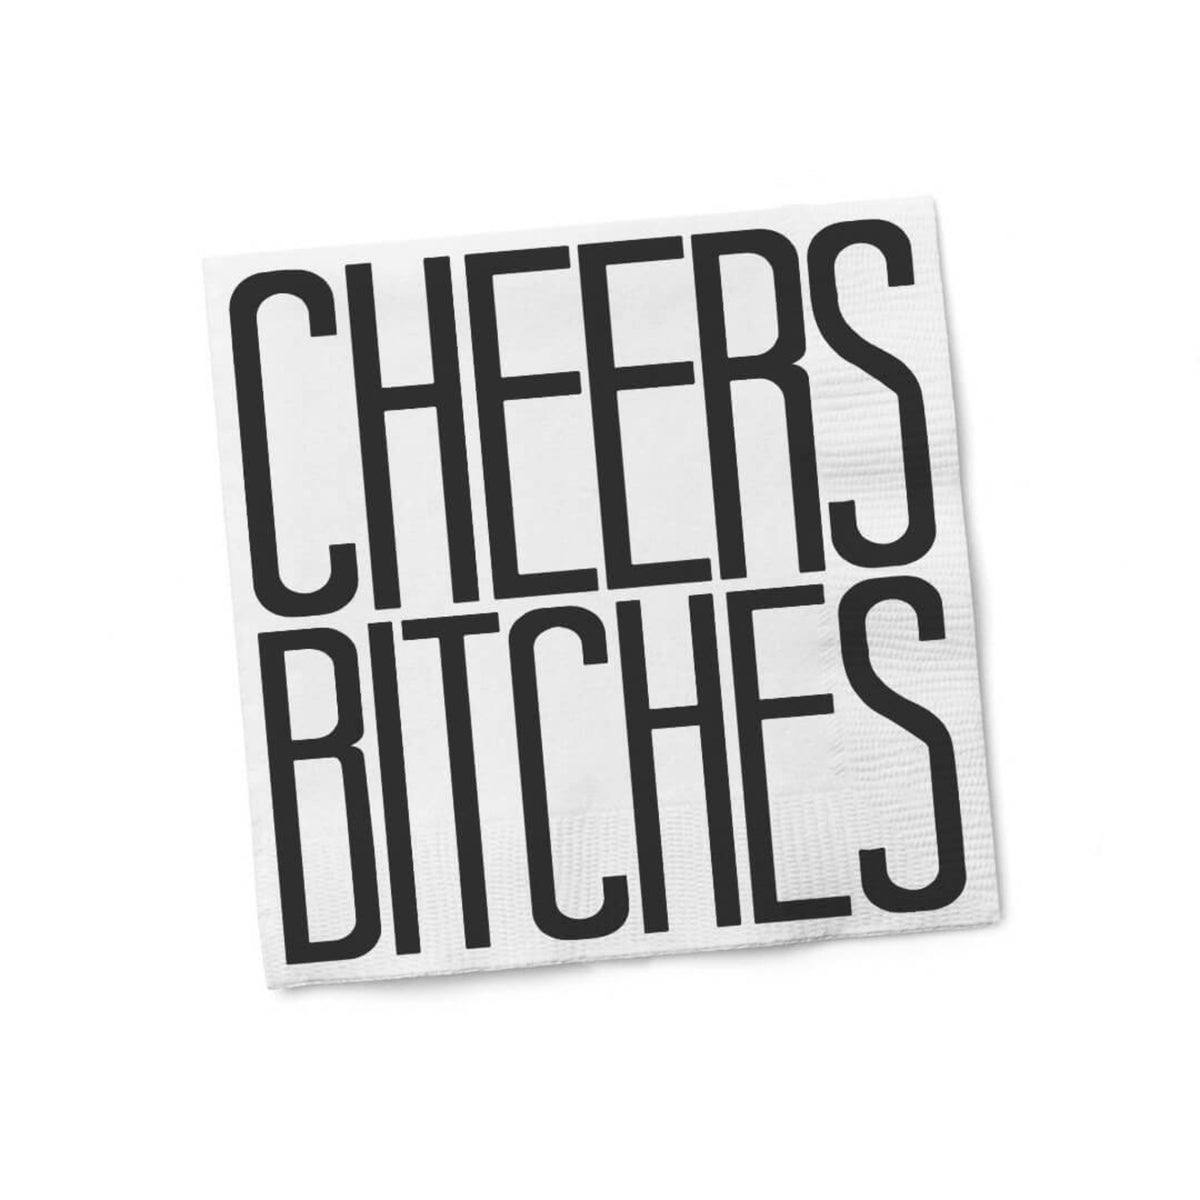 Napkins: Cheers B*tches